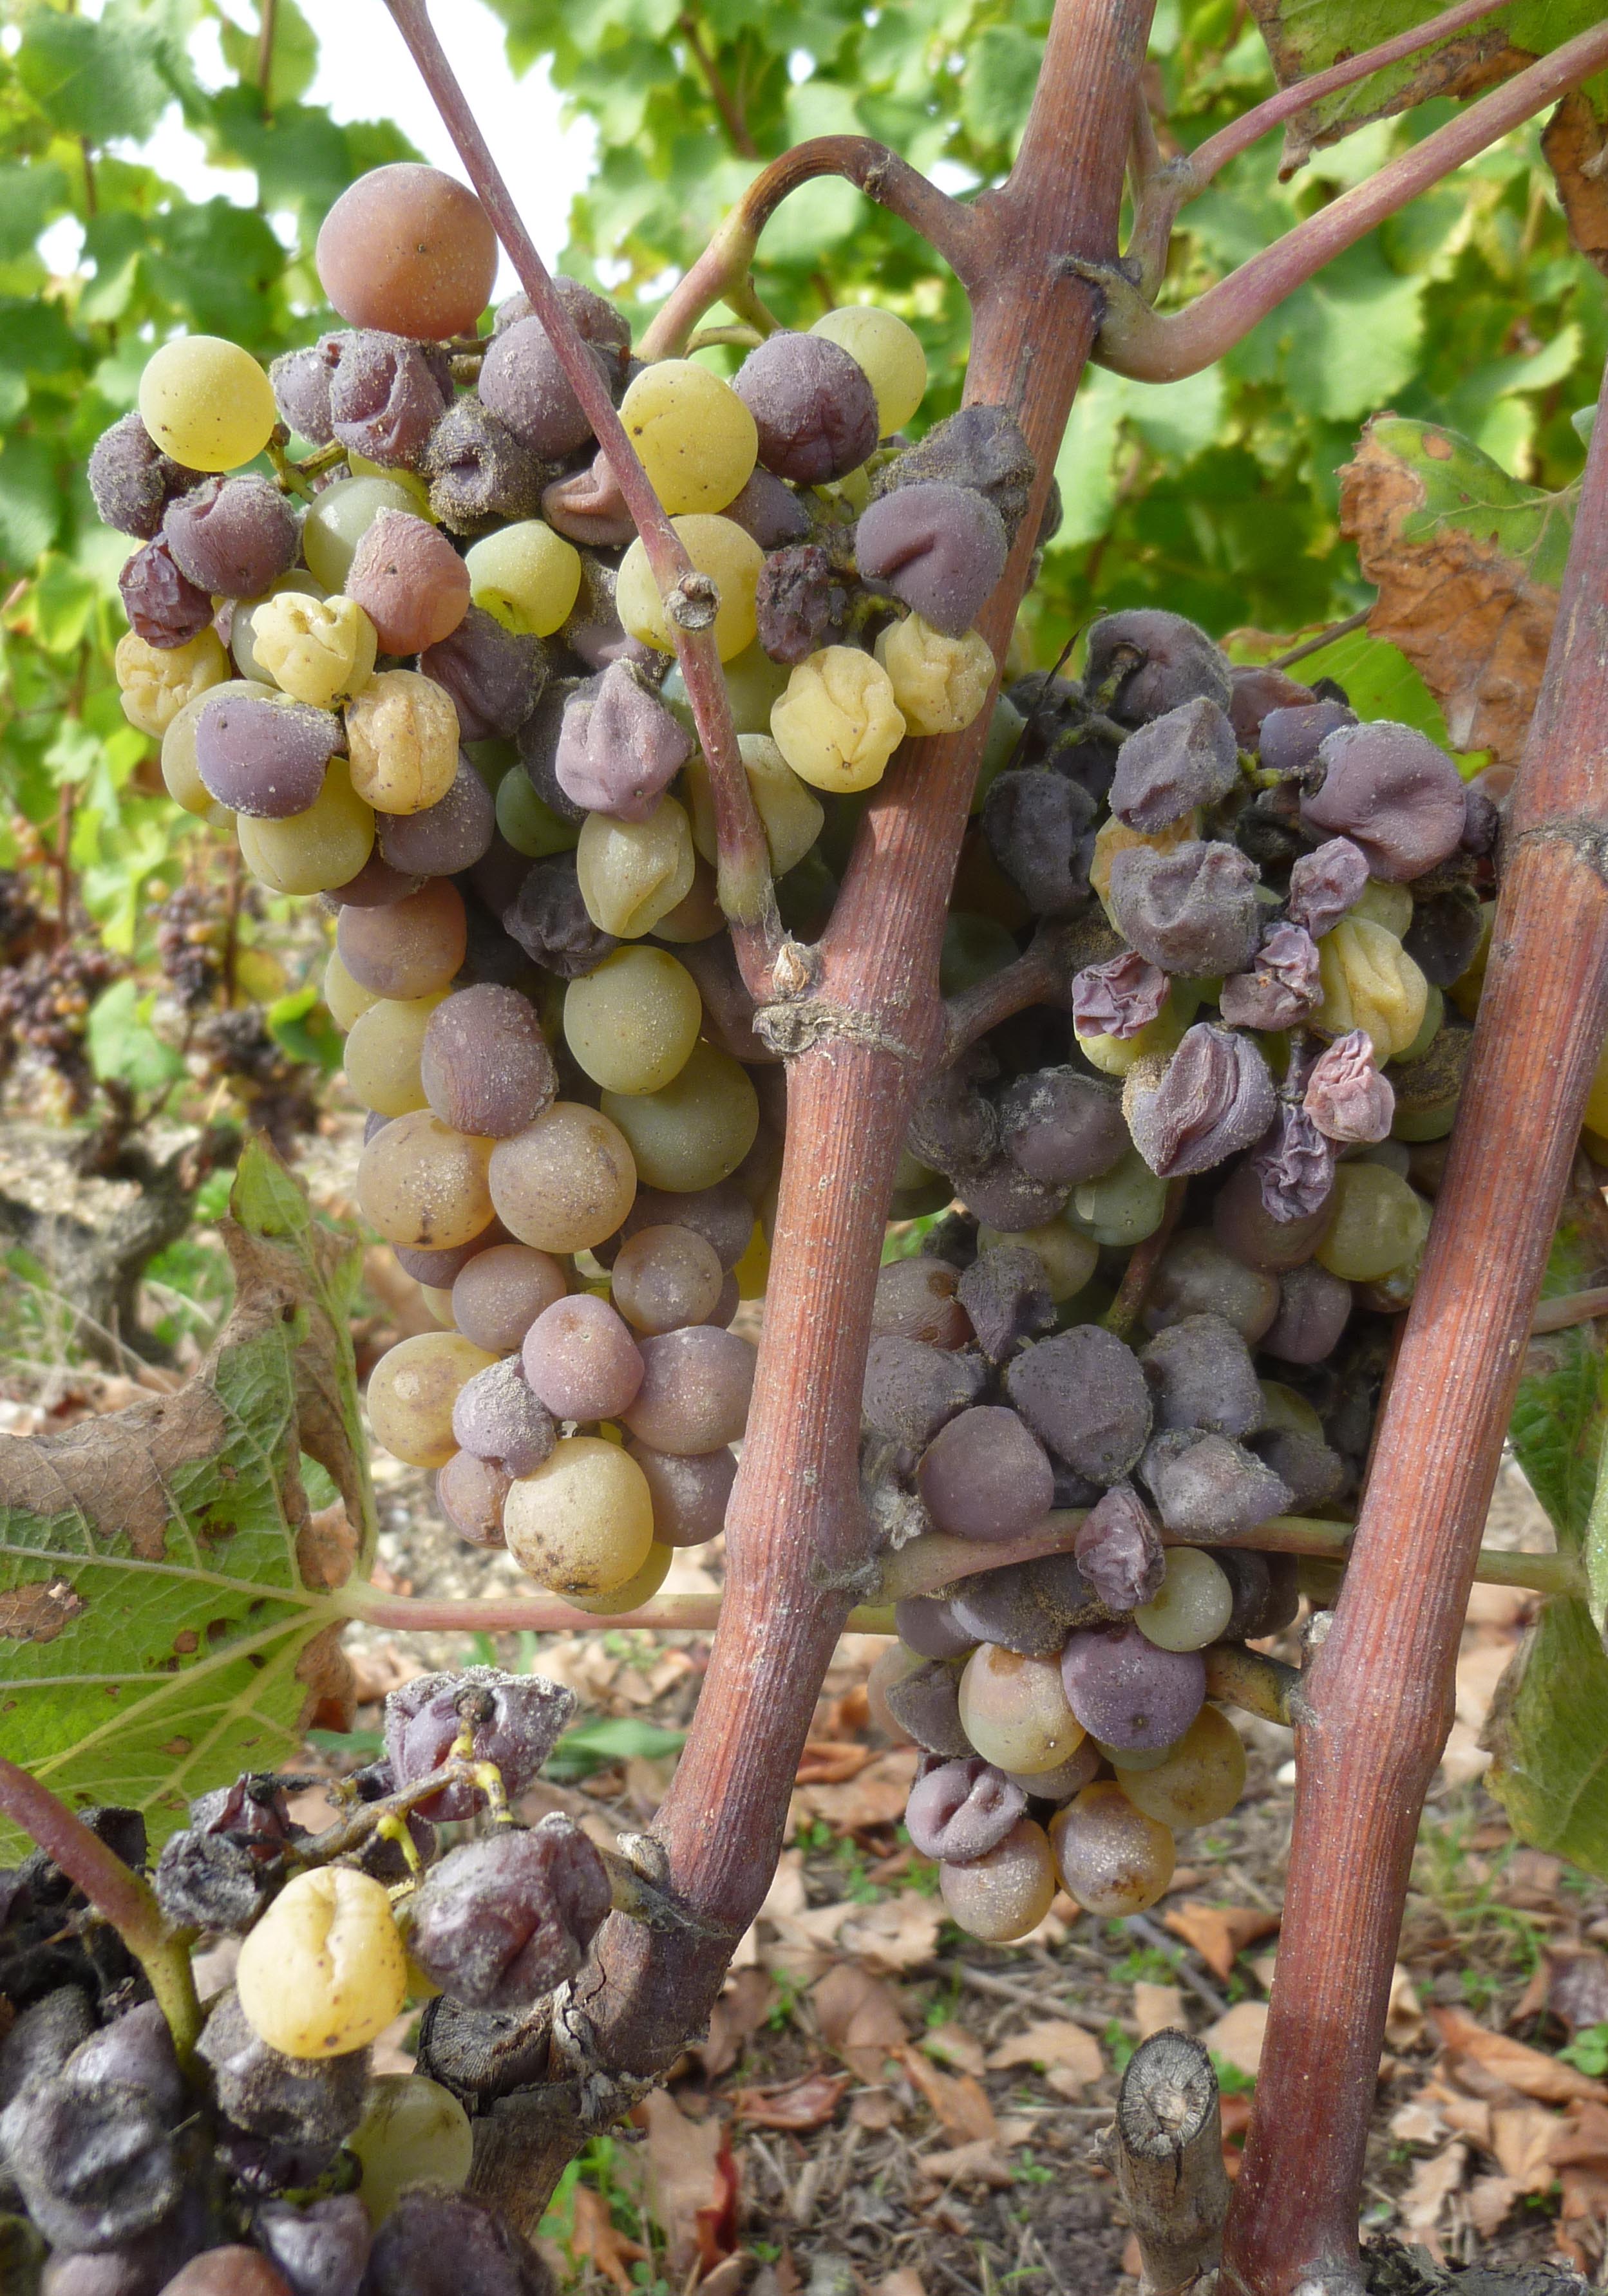 Plant pathogens like the fungus Botrytis seen on the grapes in this image cause major agricultural losses all over the world. A new study that included University of Maryland researchers discovered a key protein involved in the process plants use to close their pores in defense against such pathogens. Credit: DavityDave, Creative Commons. This image has been cropped. Click image to download hi-res version.